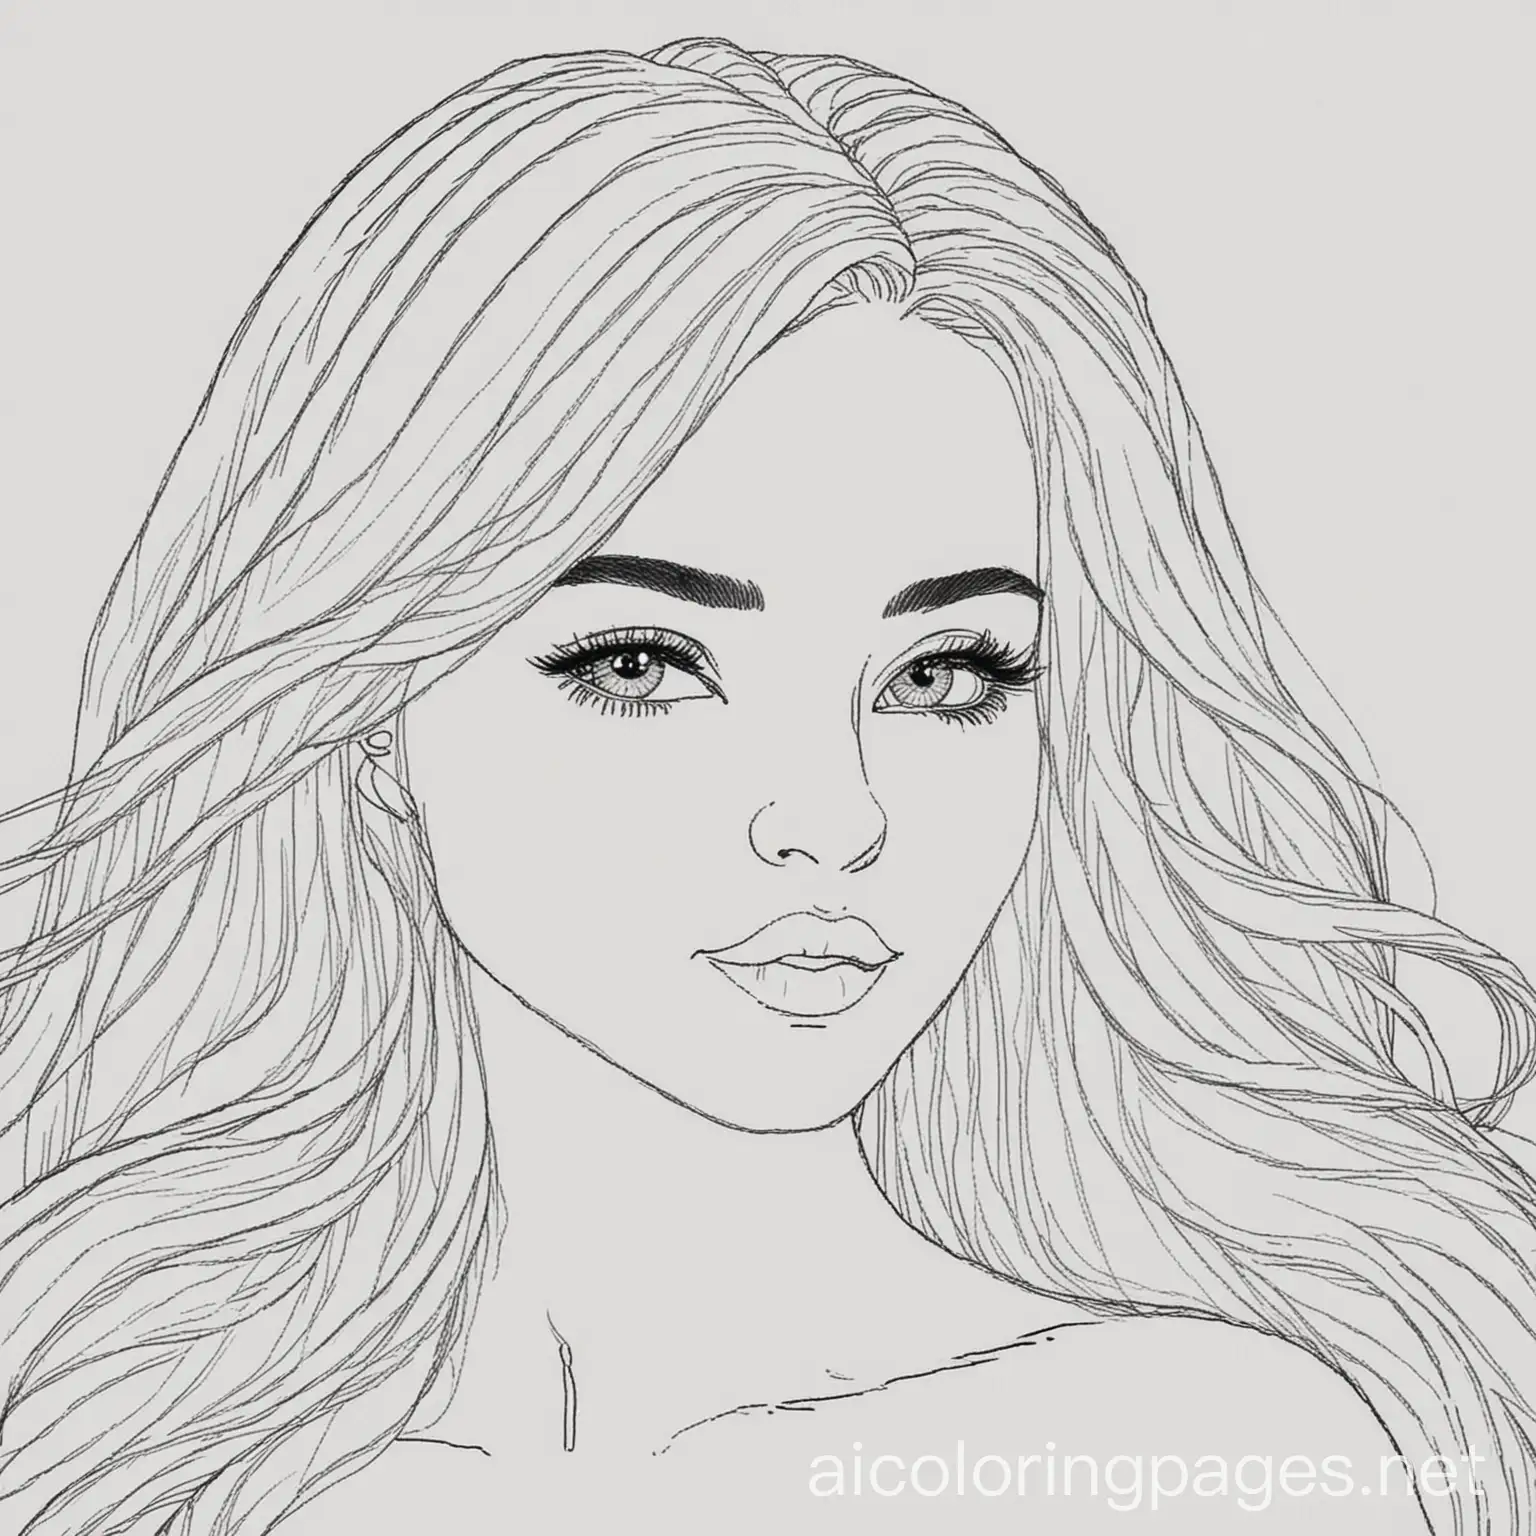 adult coloring women, Coloring Page, black and white, line art, white background, Simplicity, Ample White Space. The background of the coloring page is plain white to make it easy for young children to color within the lines. The outlines of all the subjects are easy to distinguish, making it simple for kids to color without too much difficulty